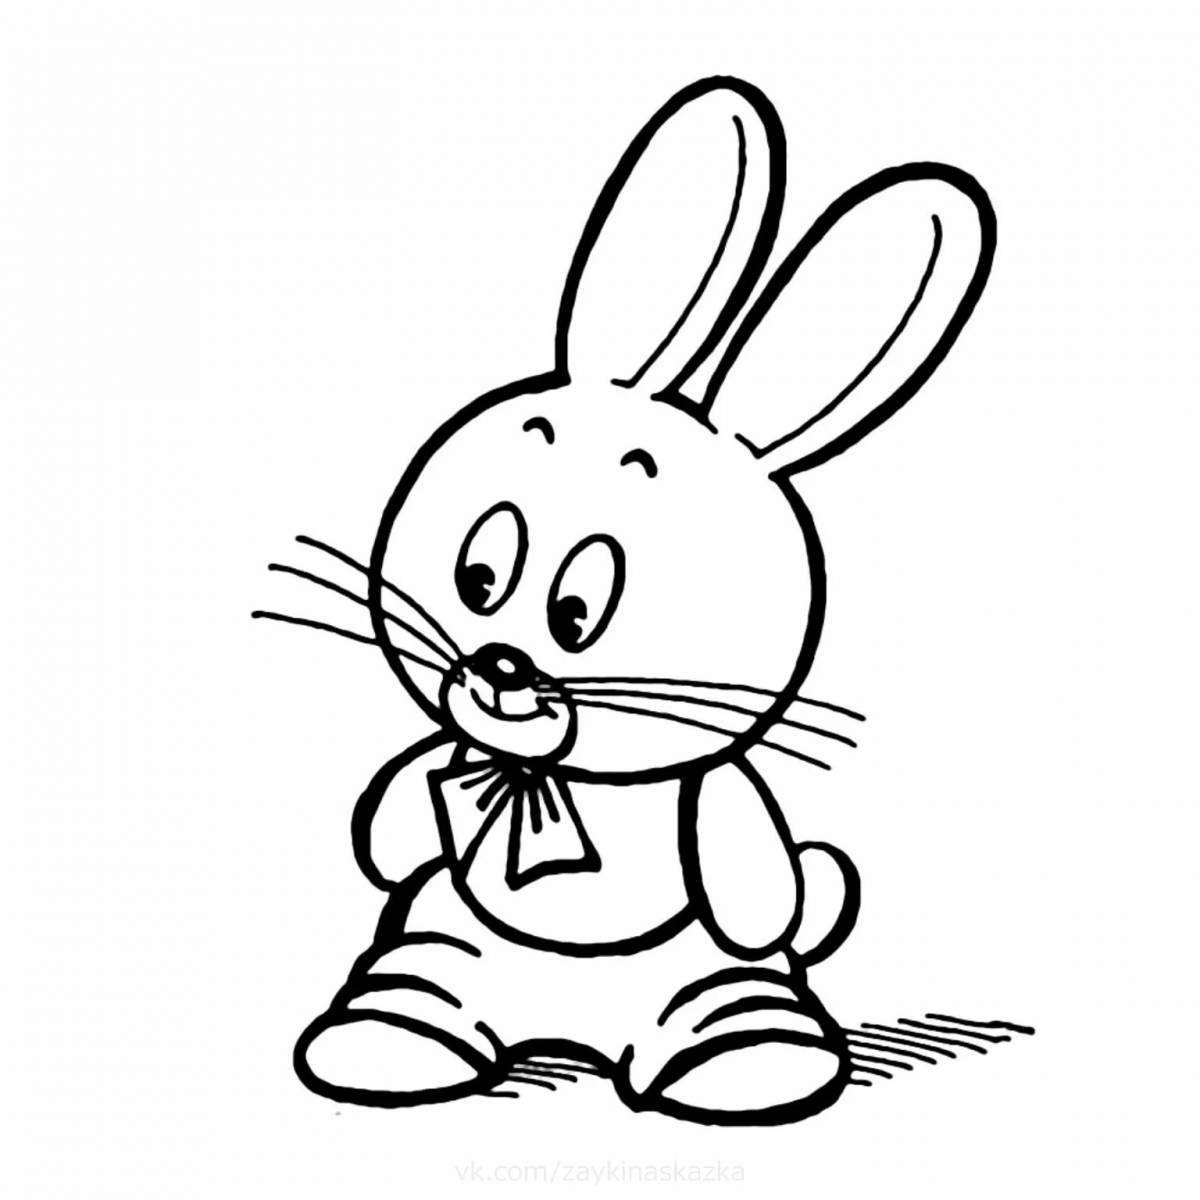 Coloring book long-tailed rabbit